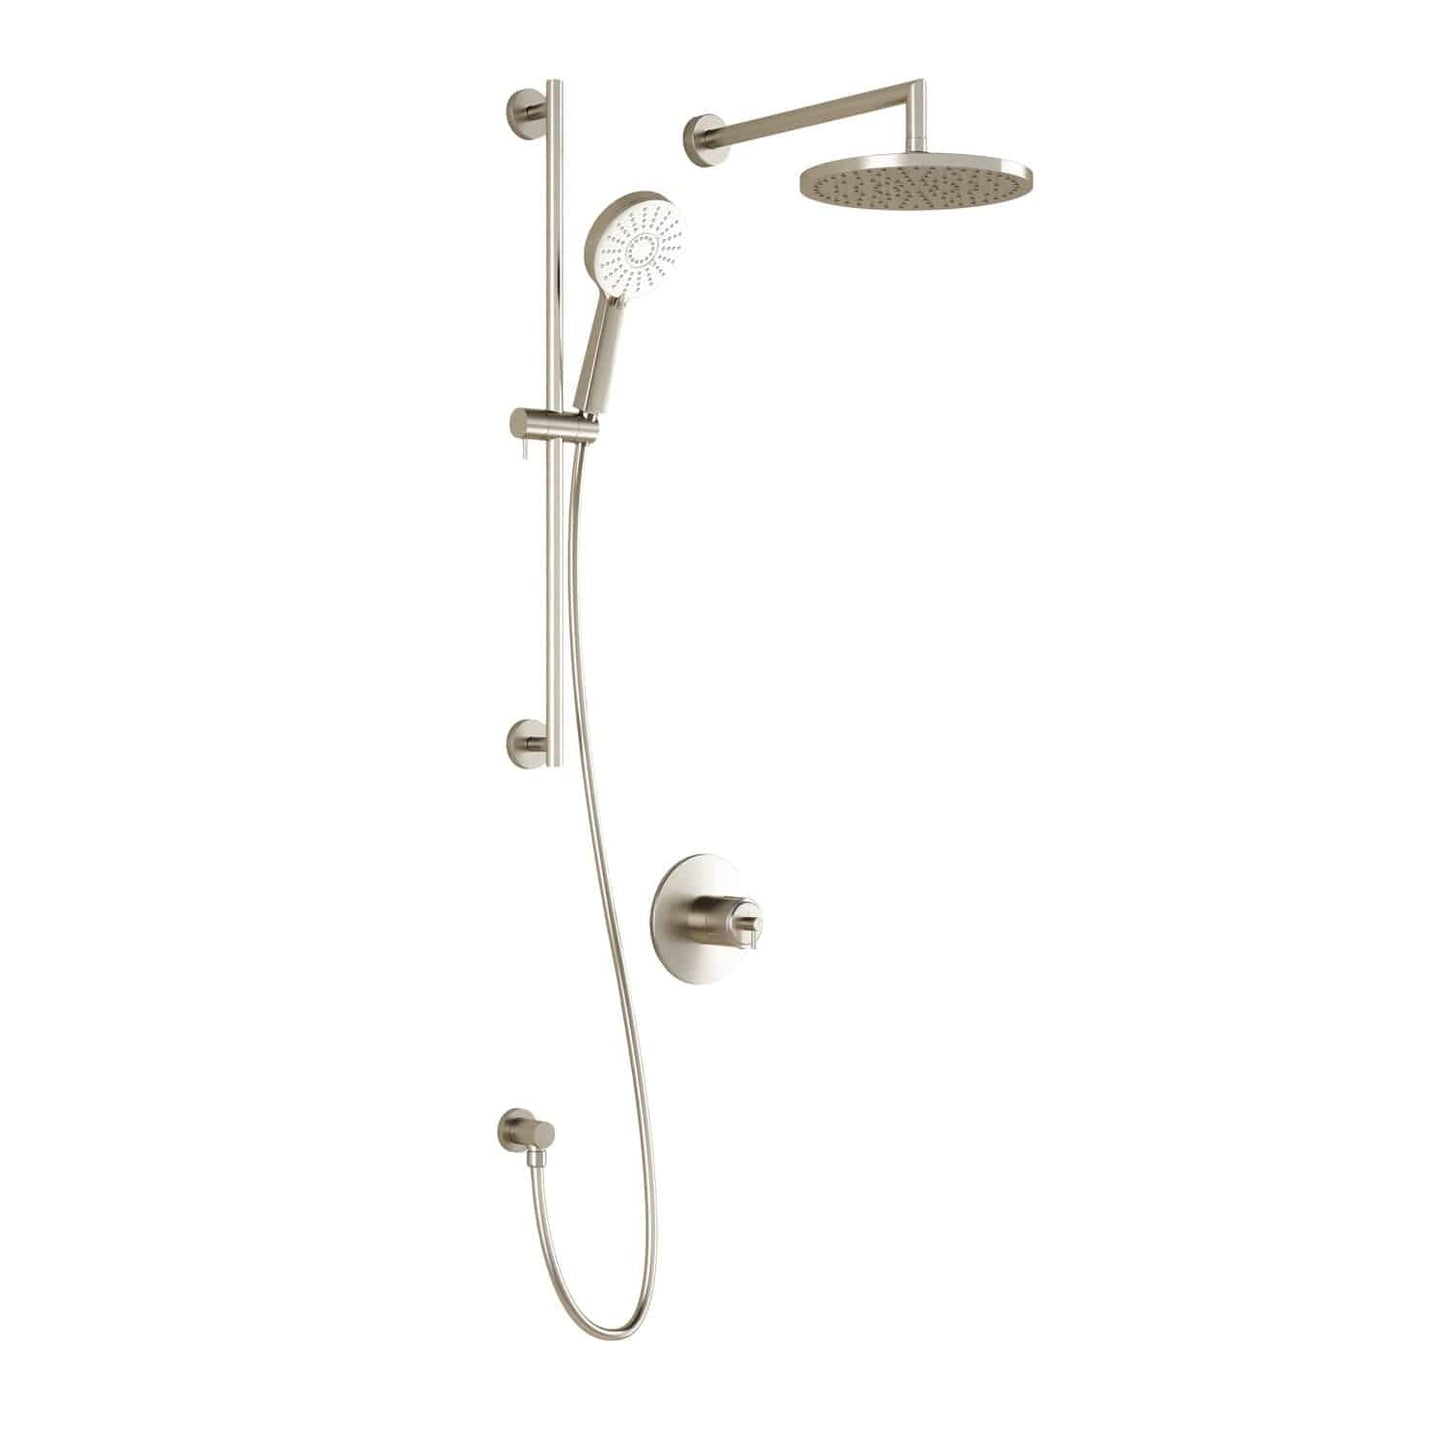 Kalia CITÉ TCD1 PLUS (Valve Not Included) AQUATONIK T/P Coaxial Shower System with Wall Arm- Brushed Nickel PVD